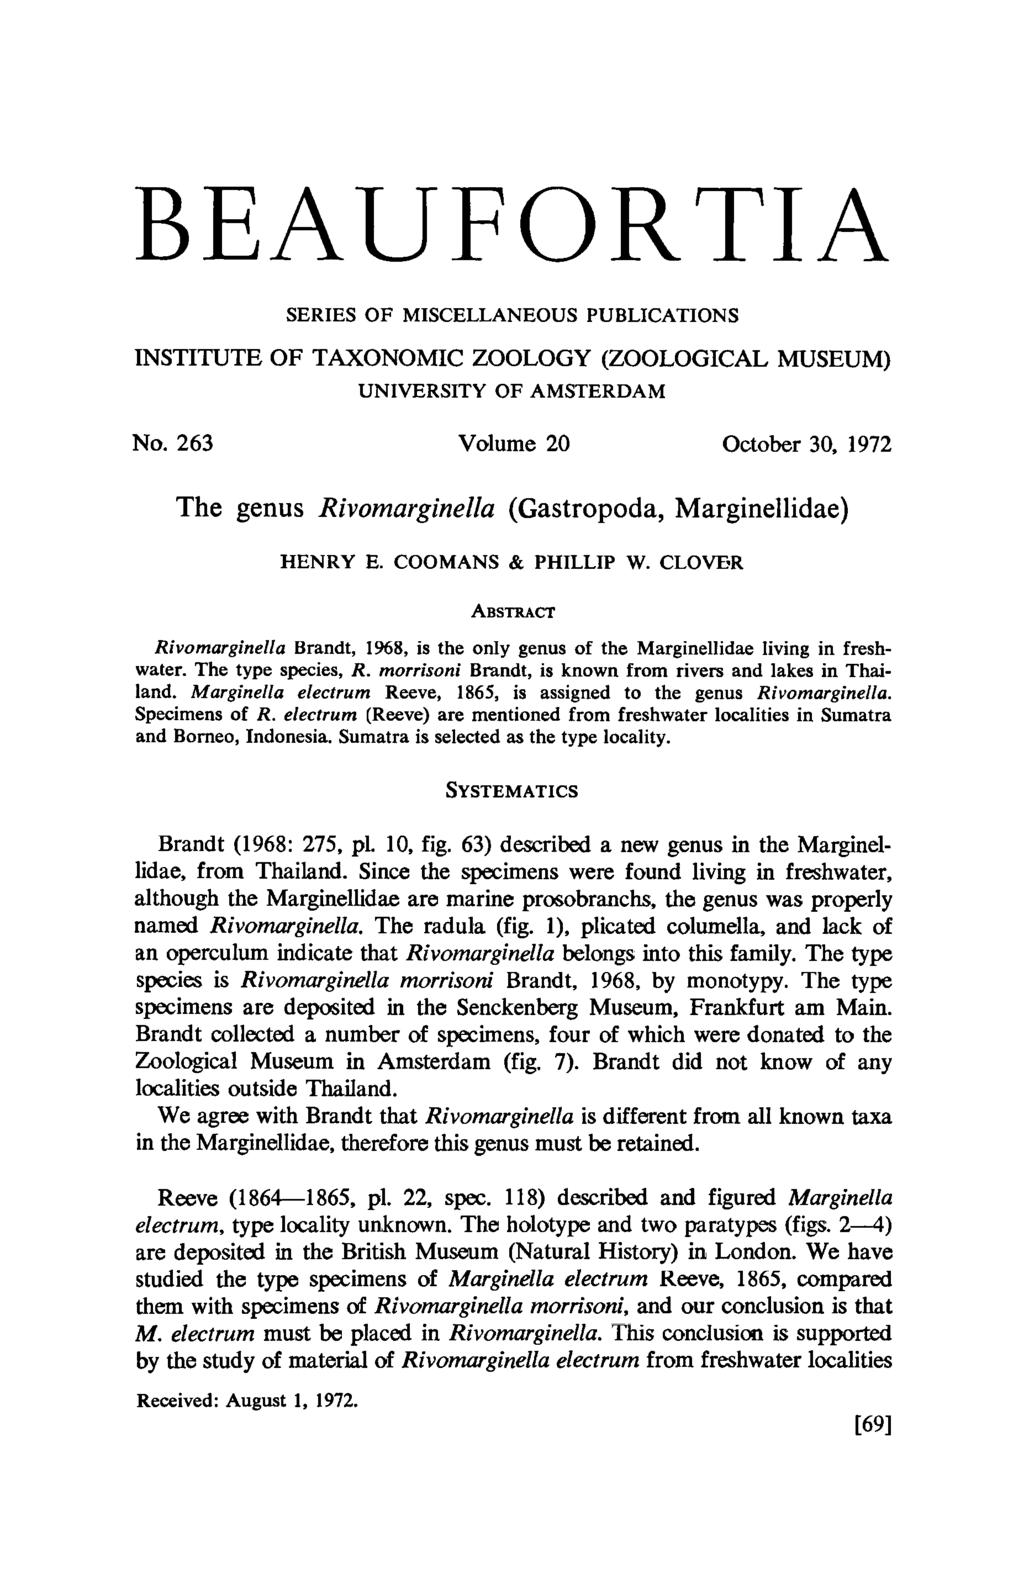 Beaufortia SERIES OF MISCELLANEOUS PUBLICATIONS INSTITUTE OF TAXONOMIC ZOOLOGY (ZOOLOGICAL MUSEUM) UNIVERSITY OF AMSTERDAM No.